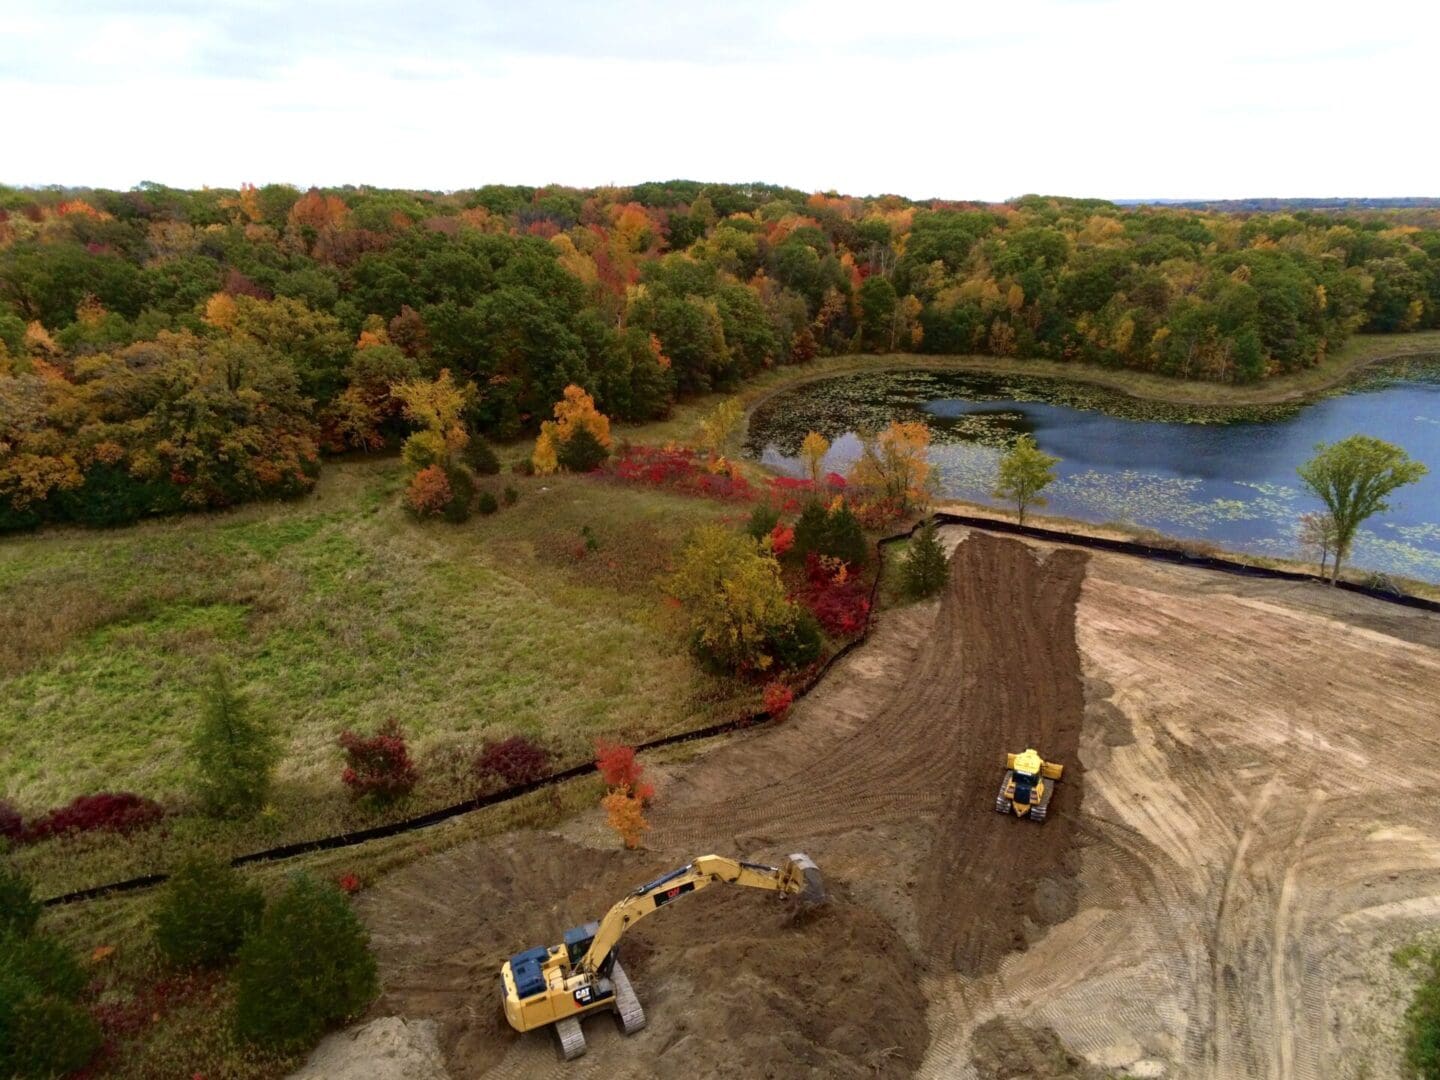 A large pond is being built with a tractor.